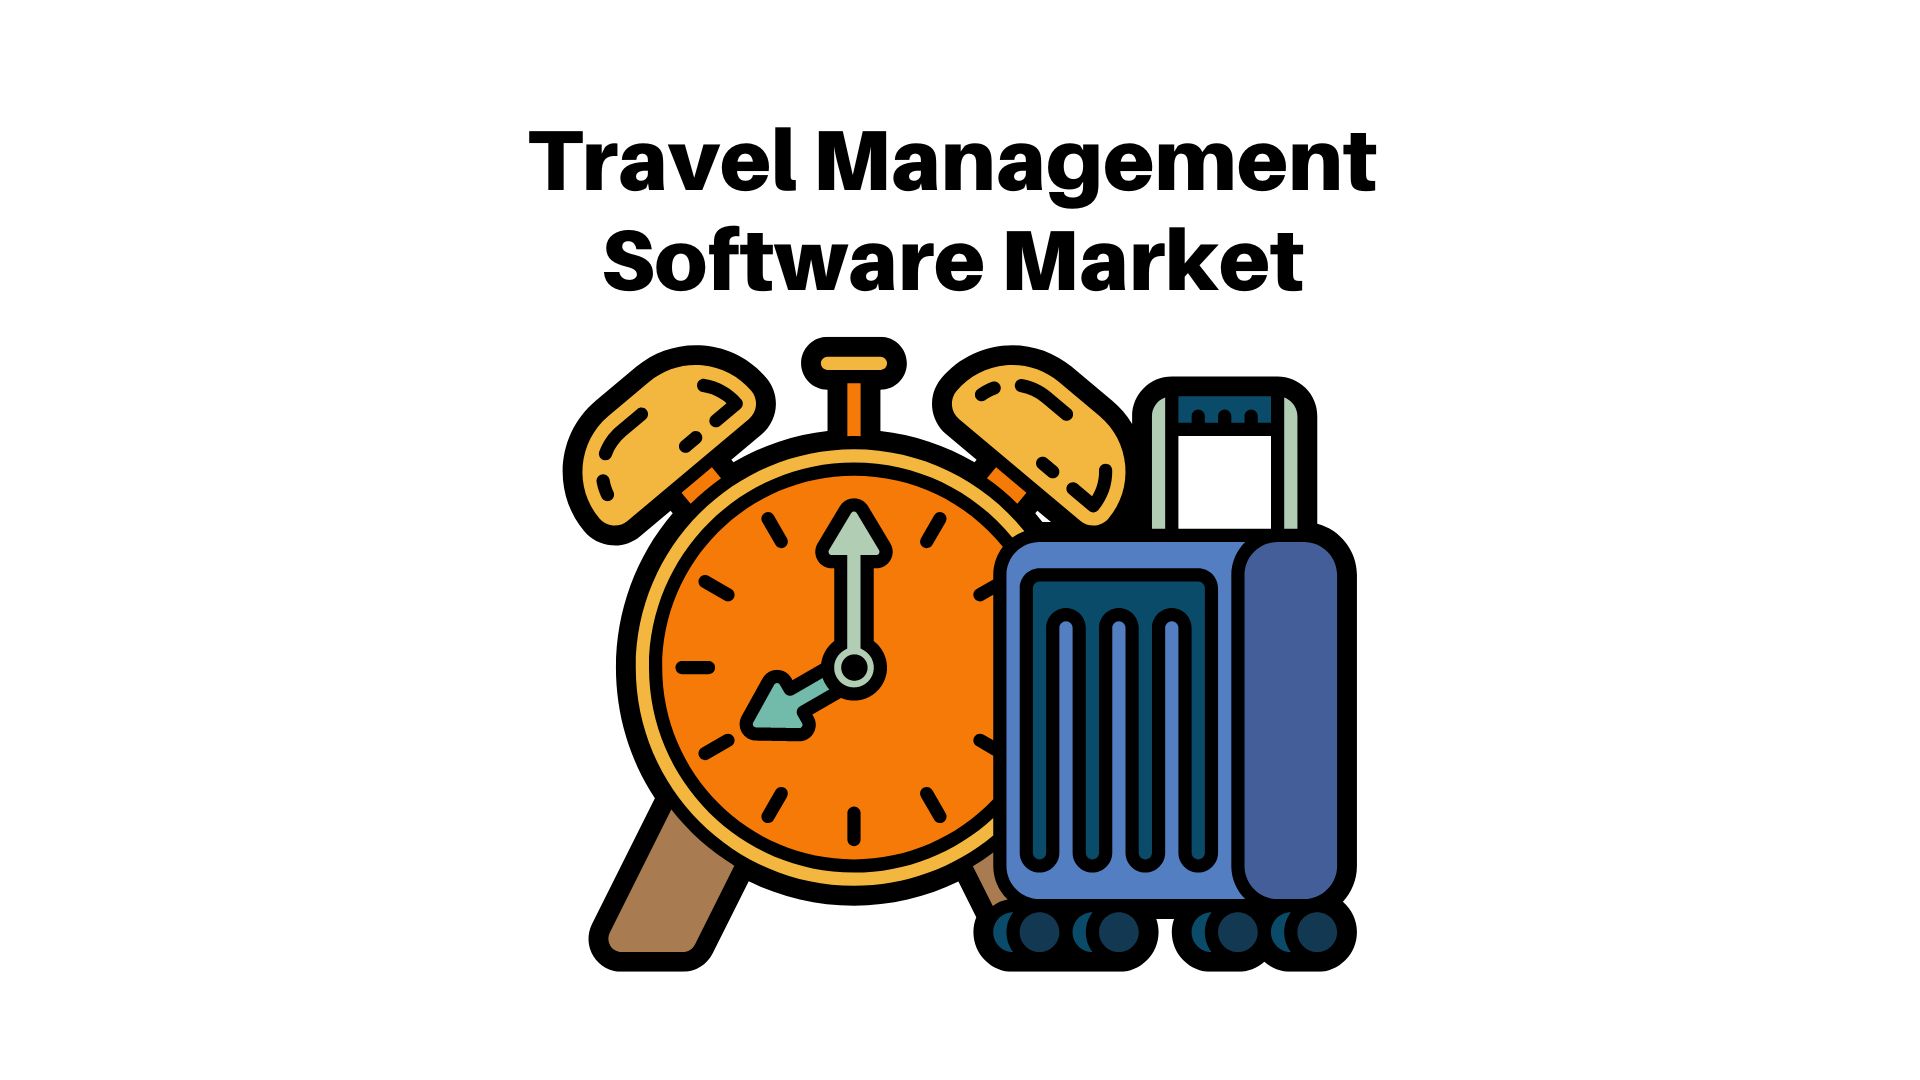 Travel Management Software Market Is Forecasted To Reach A Value Of USD 7.0 Bn In 2032